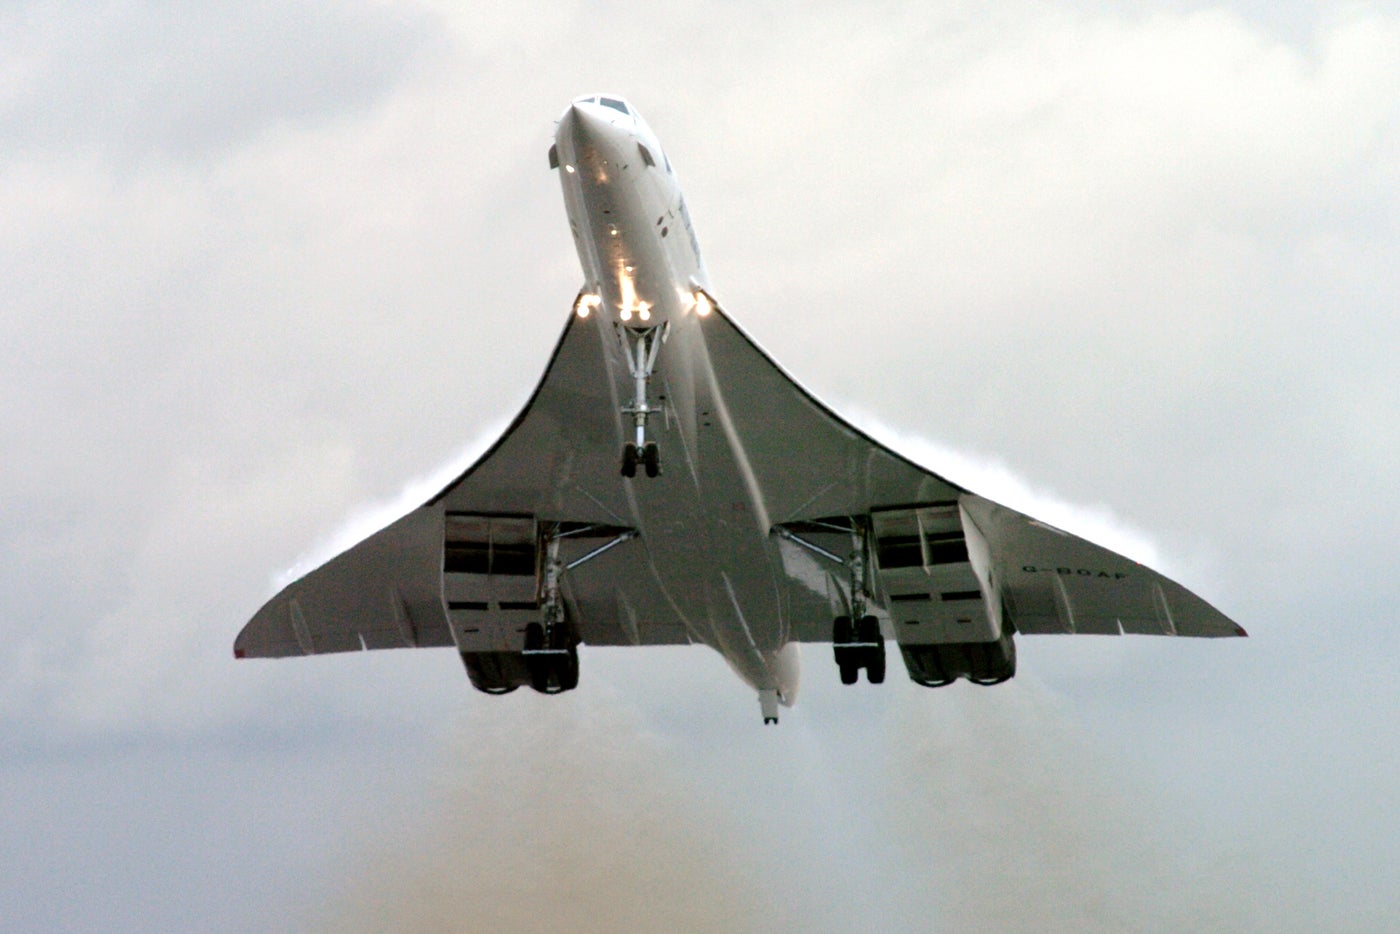 Concorde at 50: Faster Than A Speeding Bullet